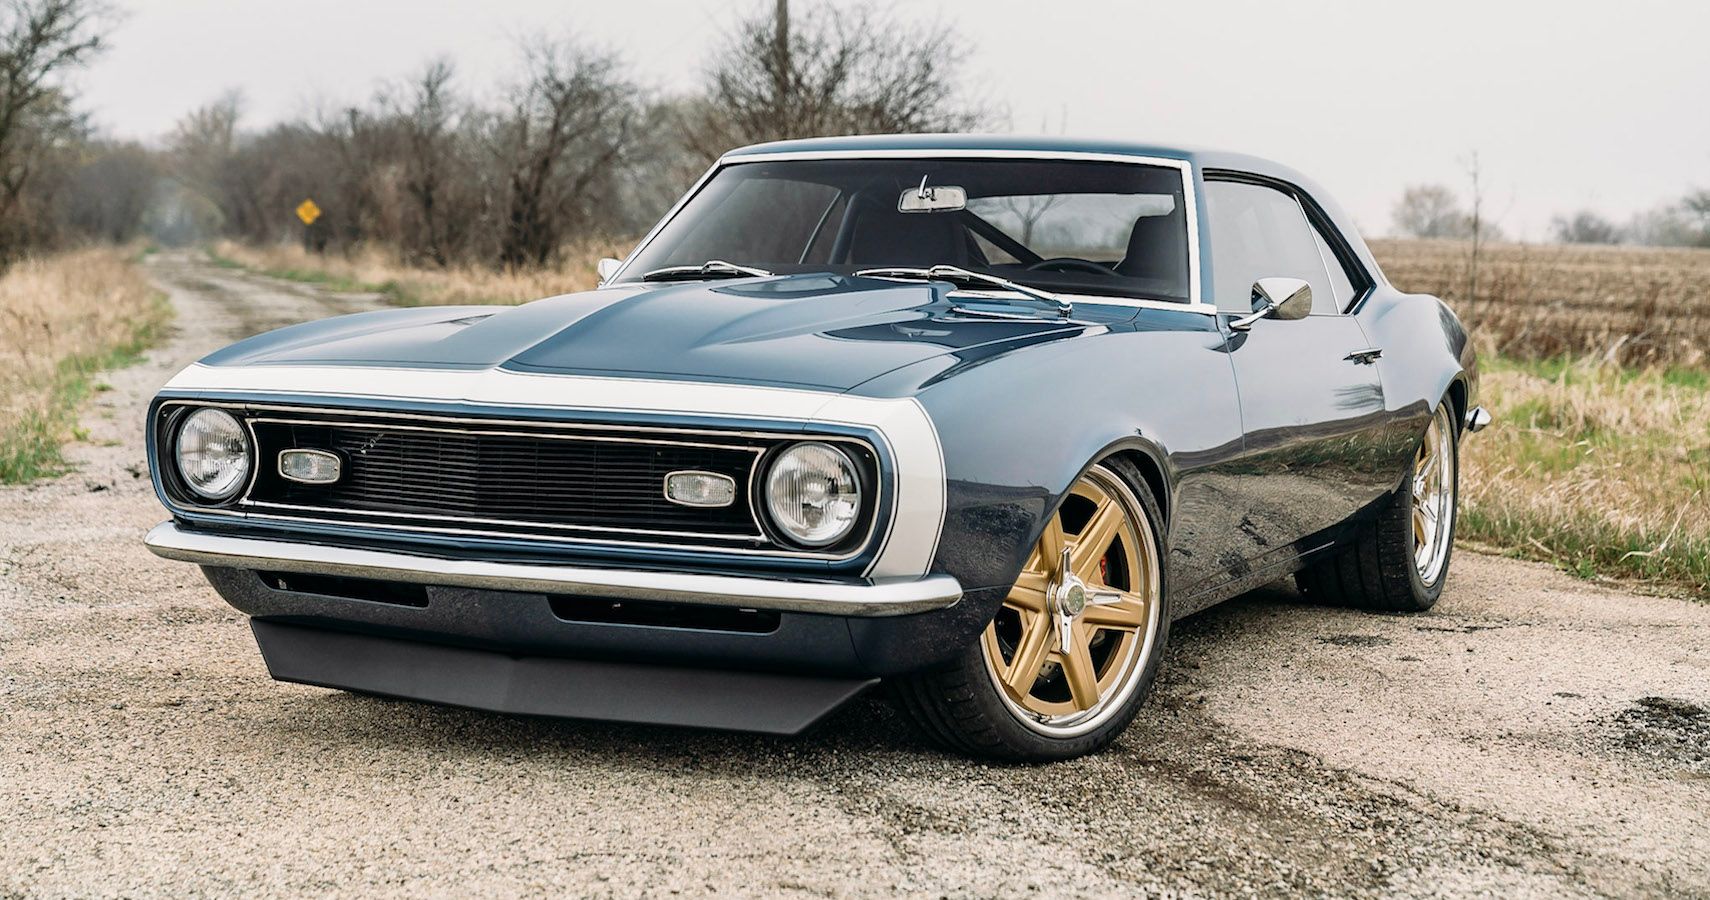 This Supercharged '68 Camaro Restomod Is A Thing Of Beauty